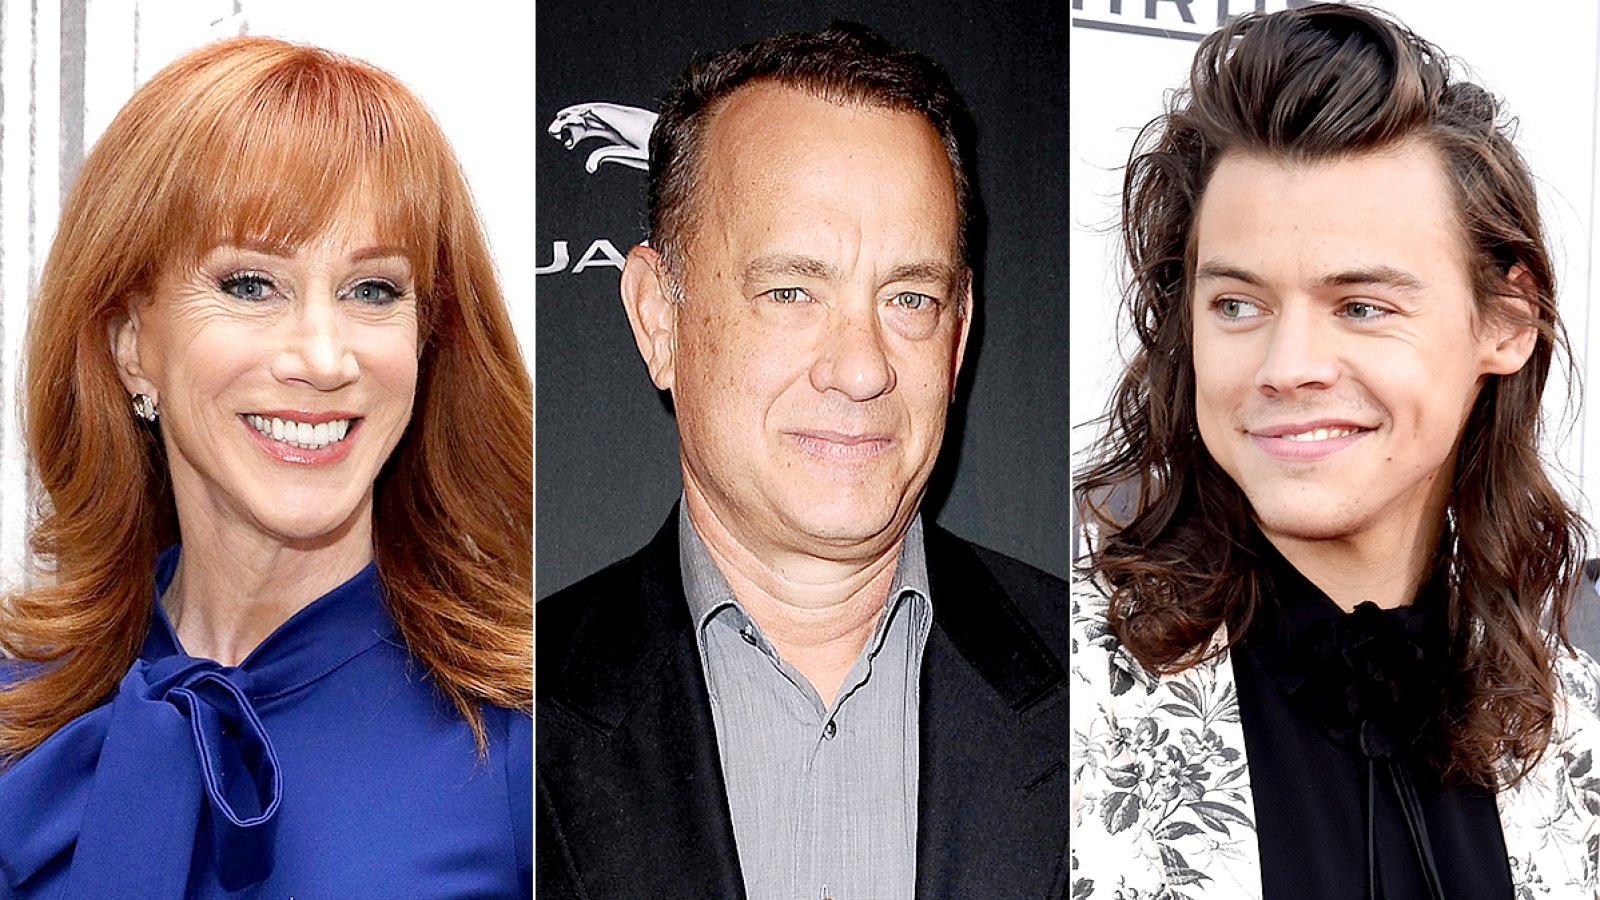 Kathy Griffin, Tom Hanks, and Harry Styles